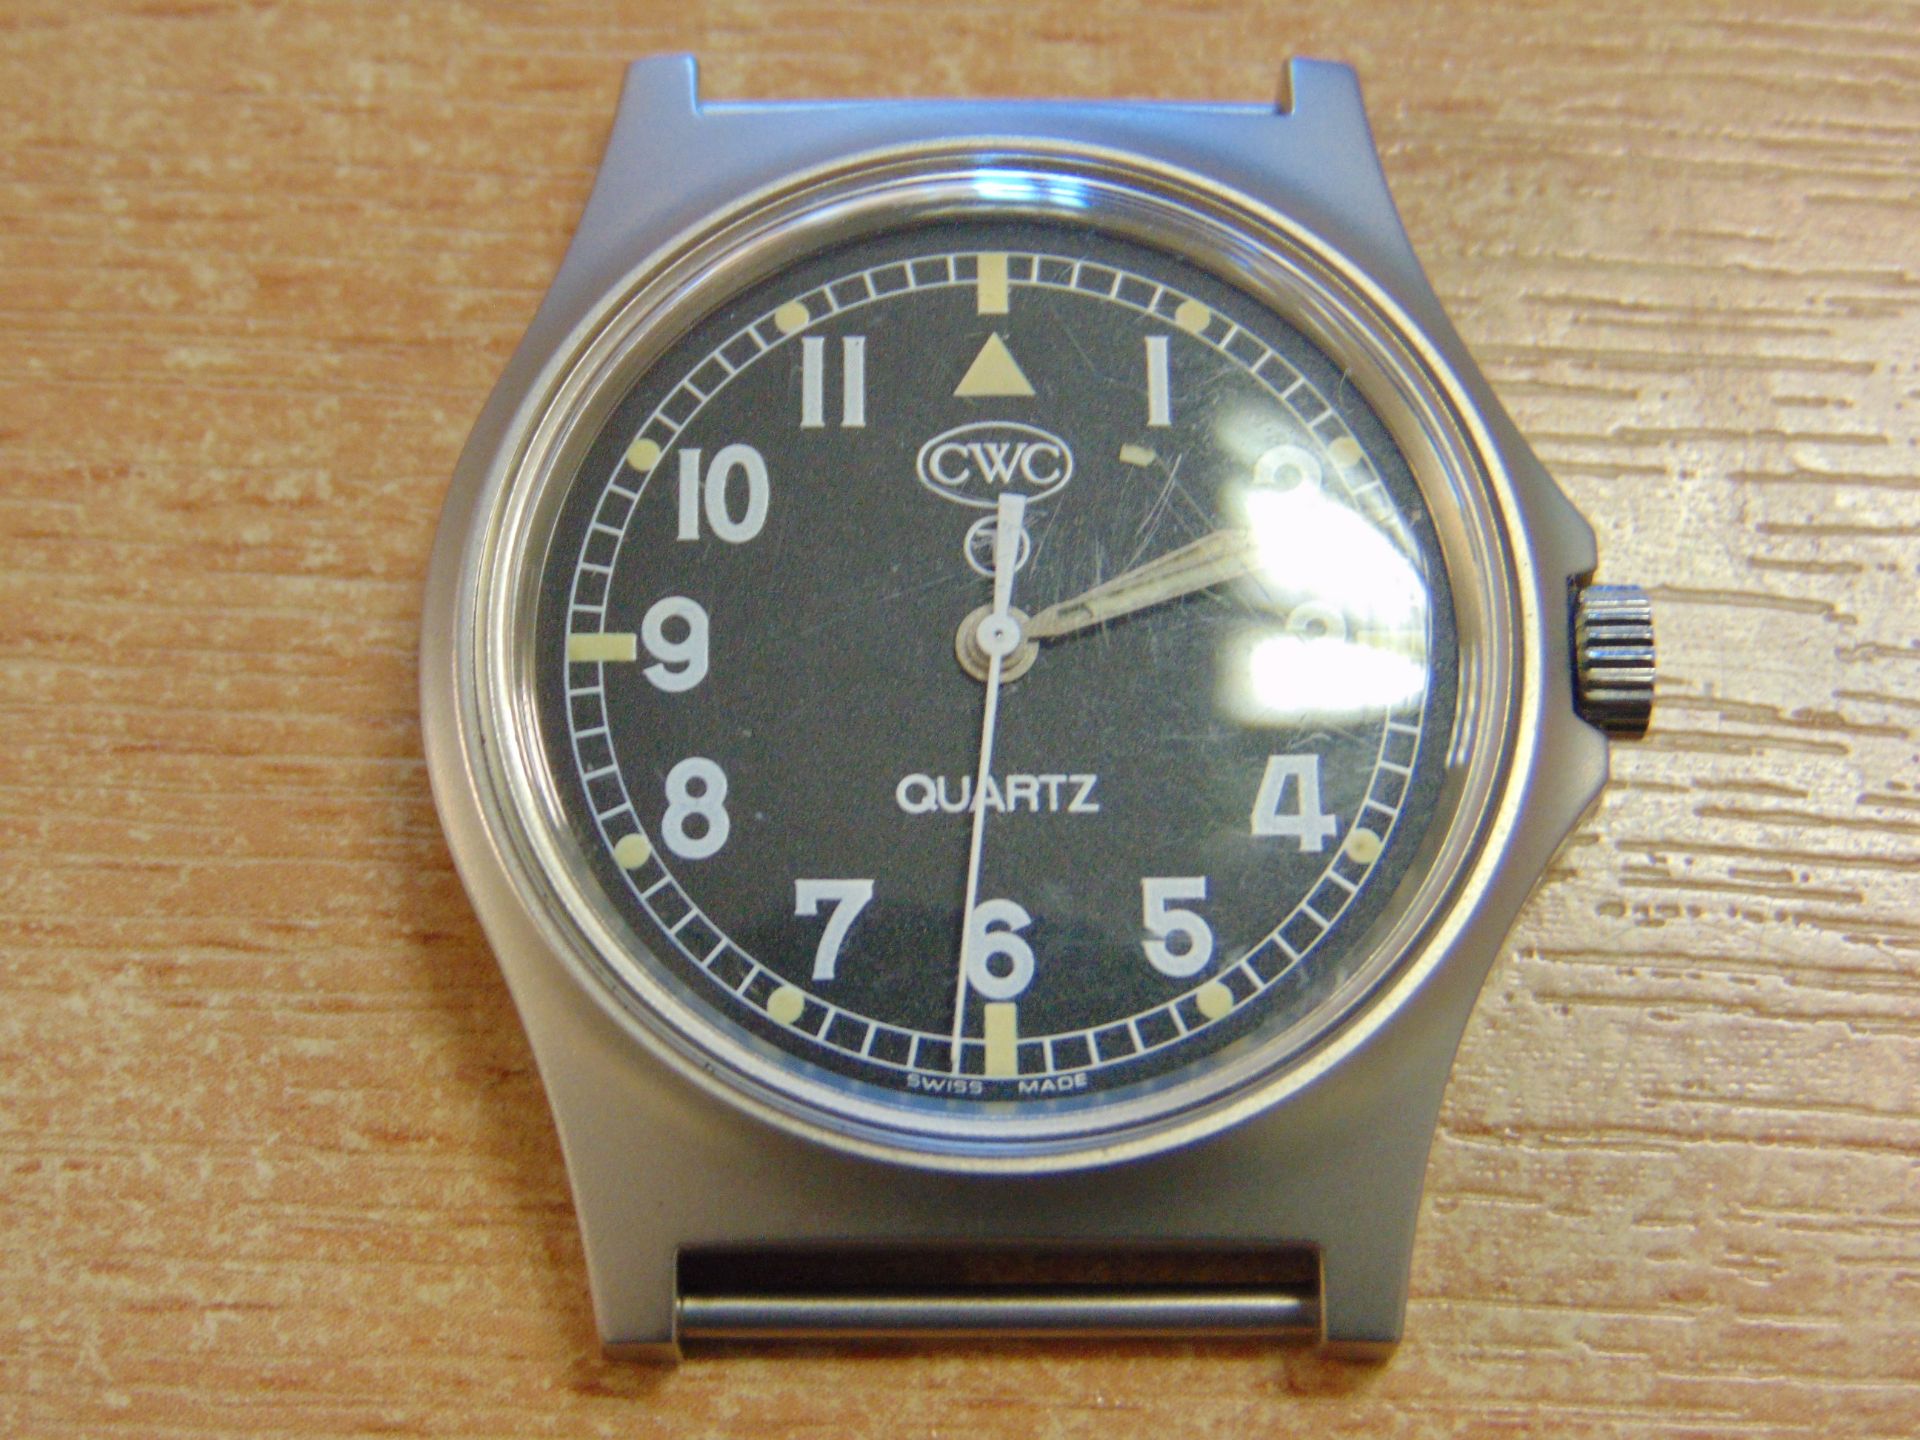 CWC W 10 SERVICE WATCH WATER RESISTANT NATO MARKED DATED 2004 - UNISSUED - Image 4 of 11